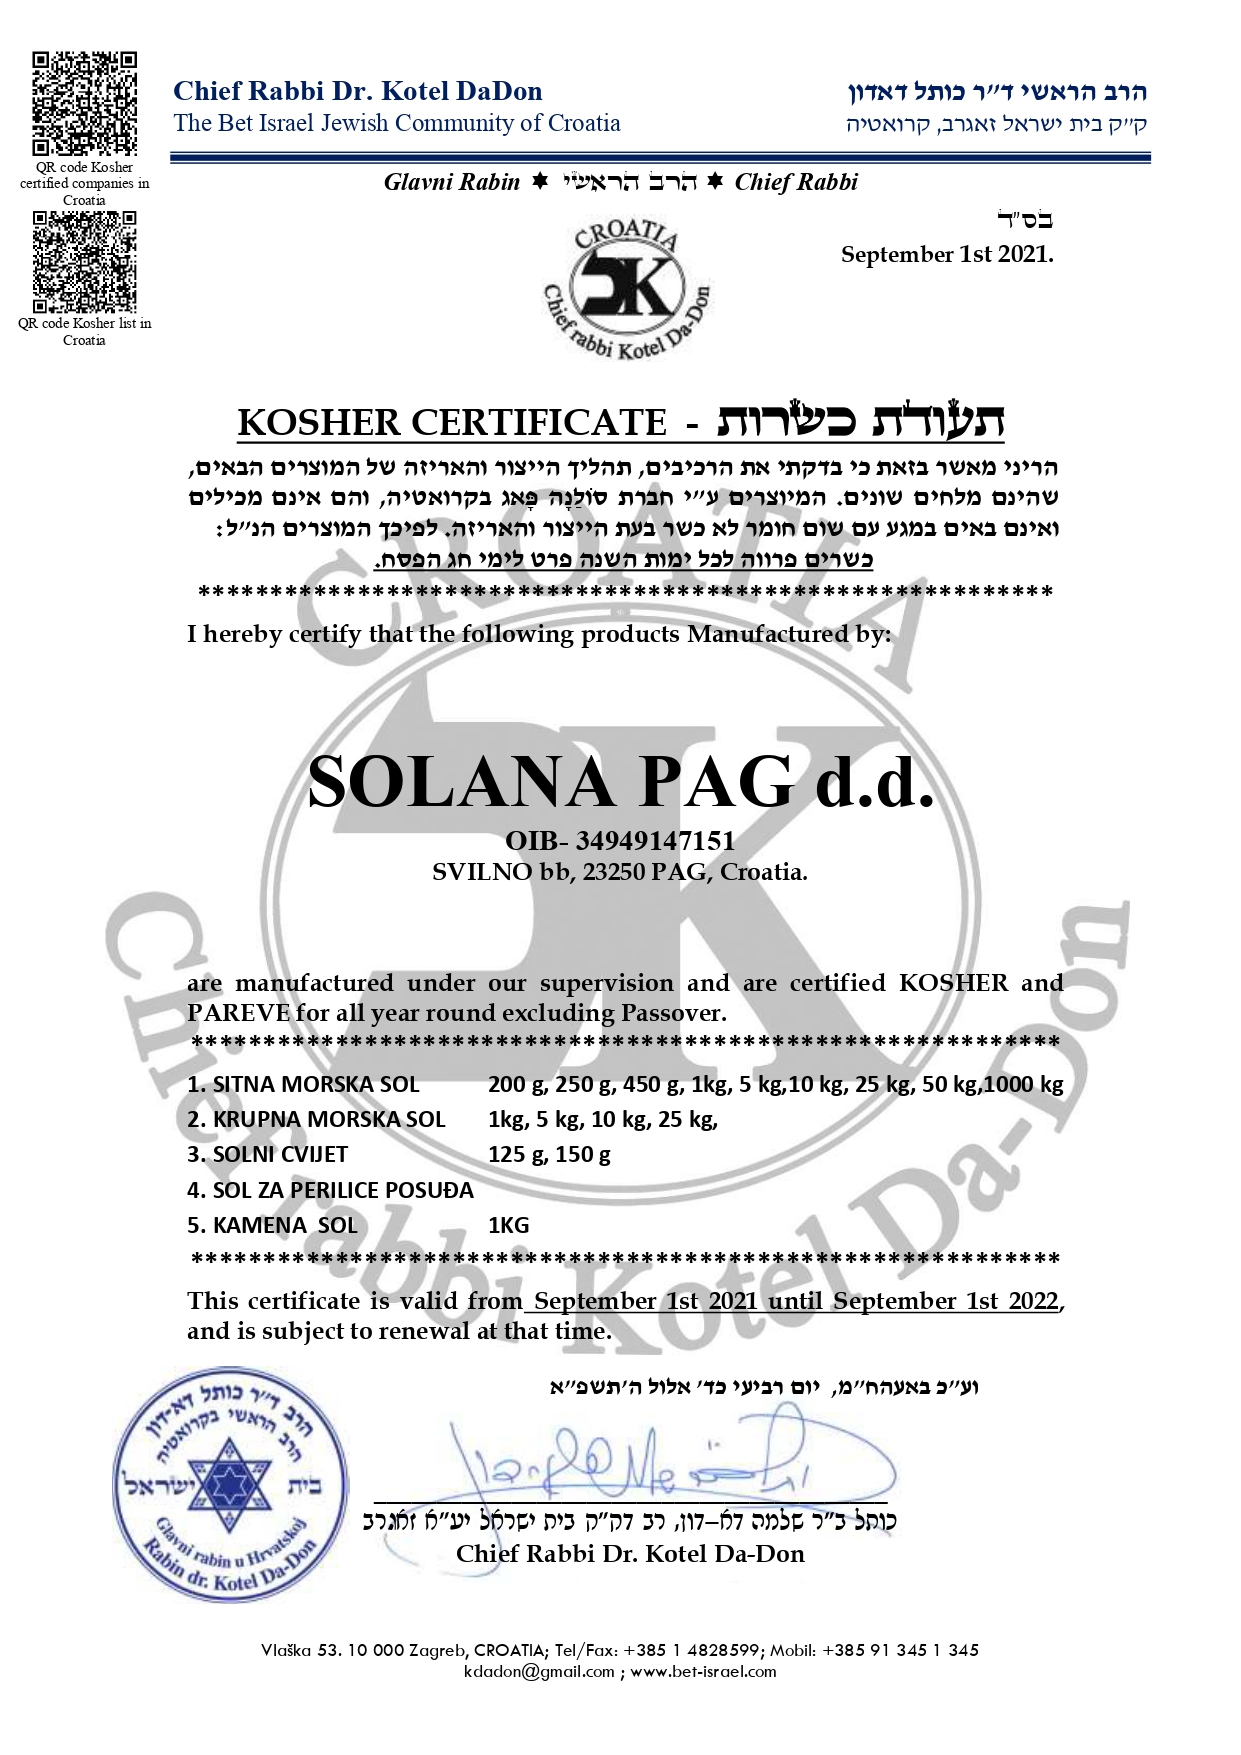 Kosher Certificate for Solana Pag d.d. 2021-2022_page-0001